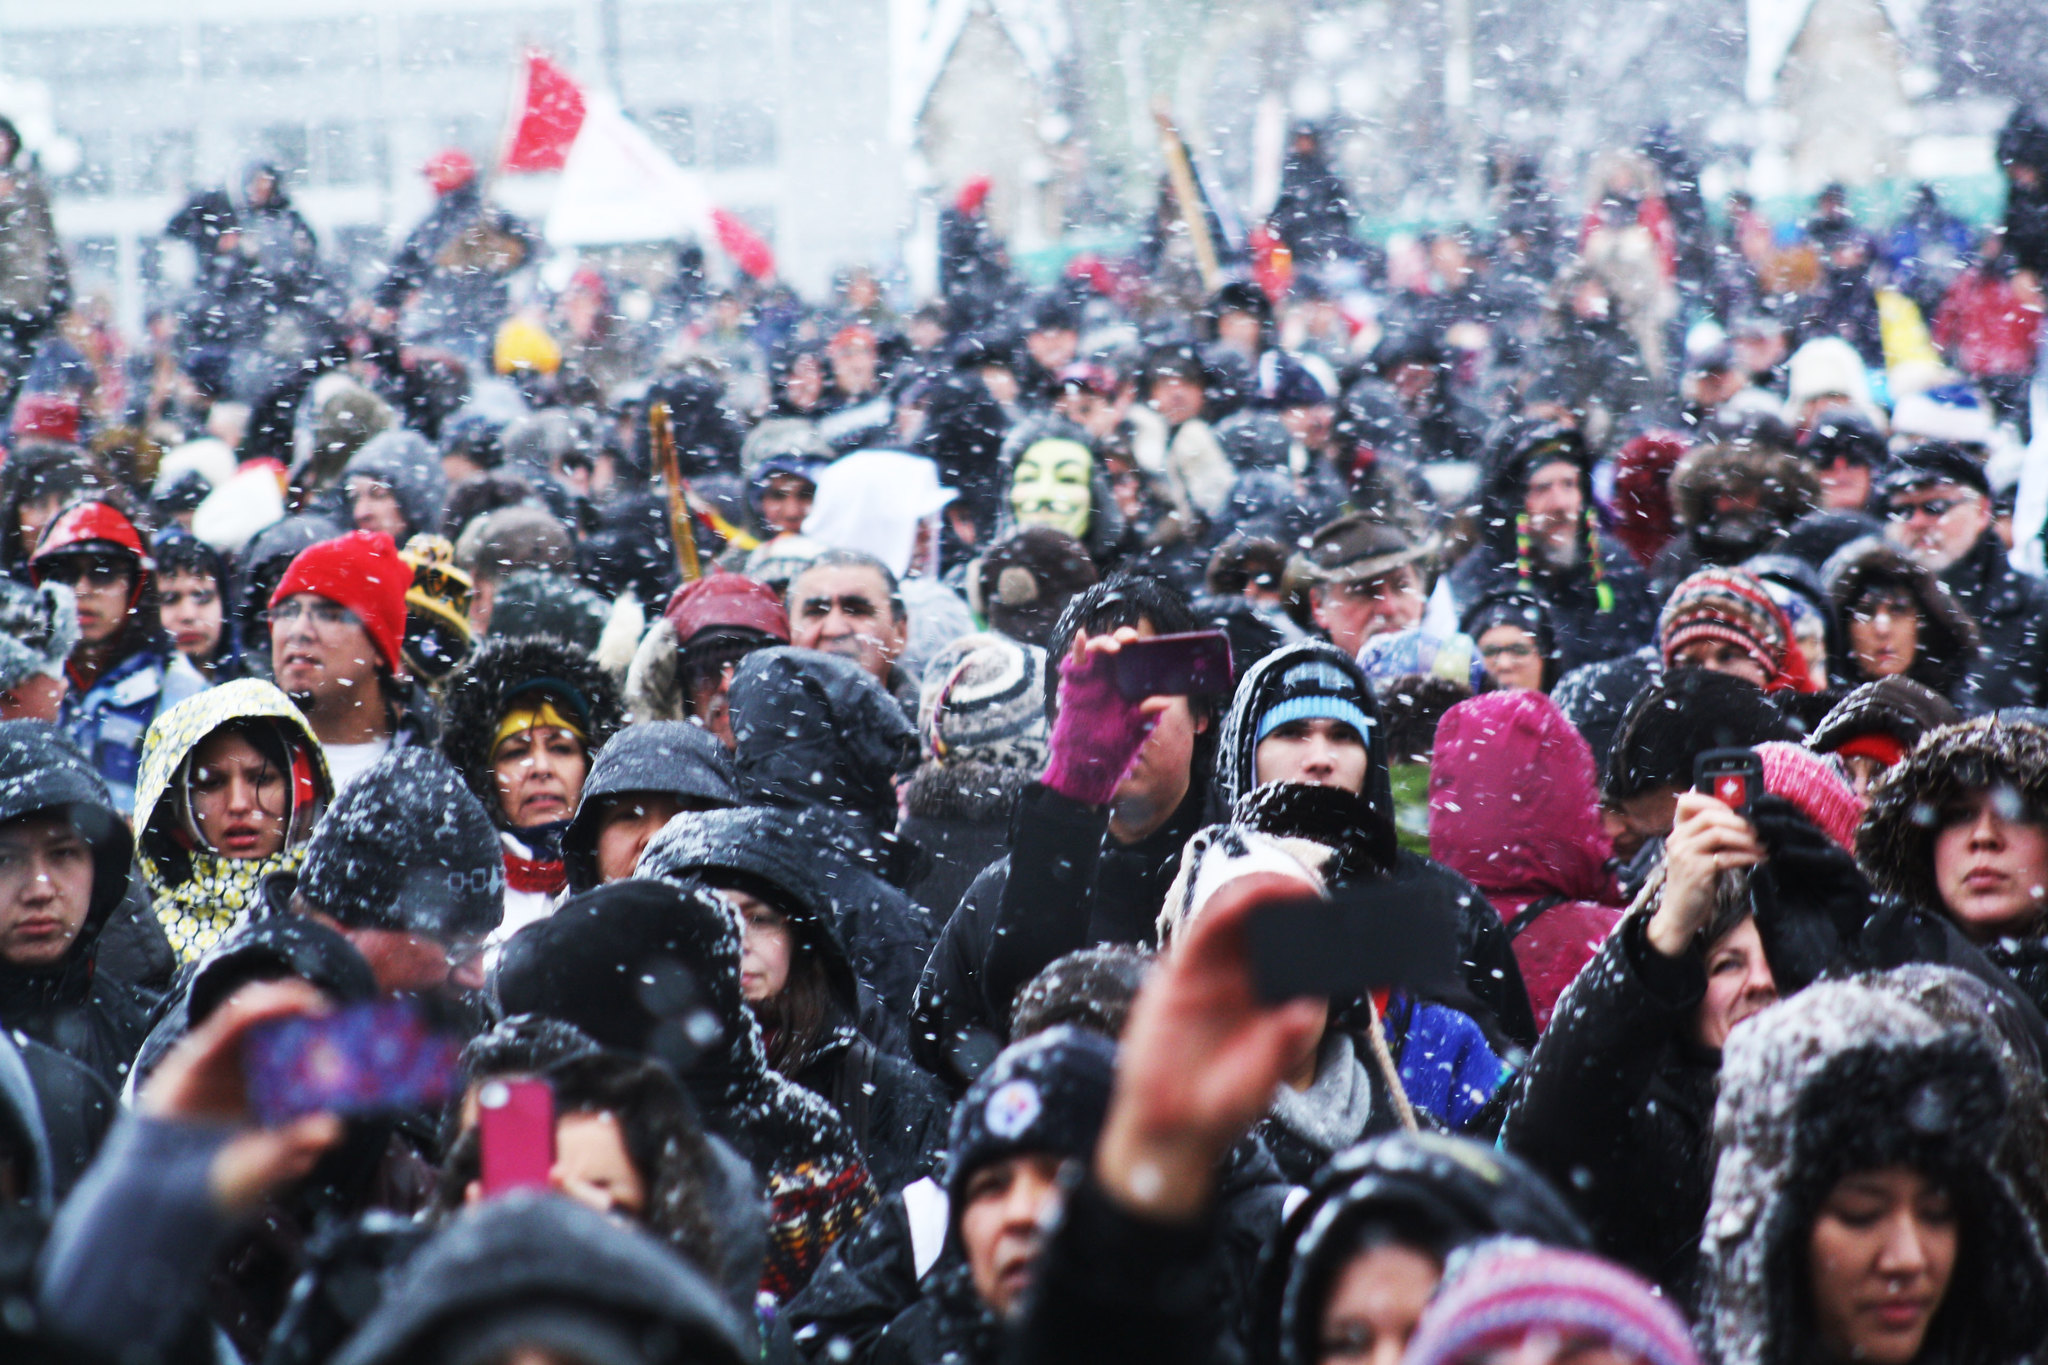 Idle No More Ottawa Action - faces in crowd